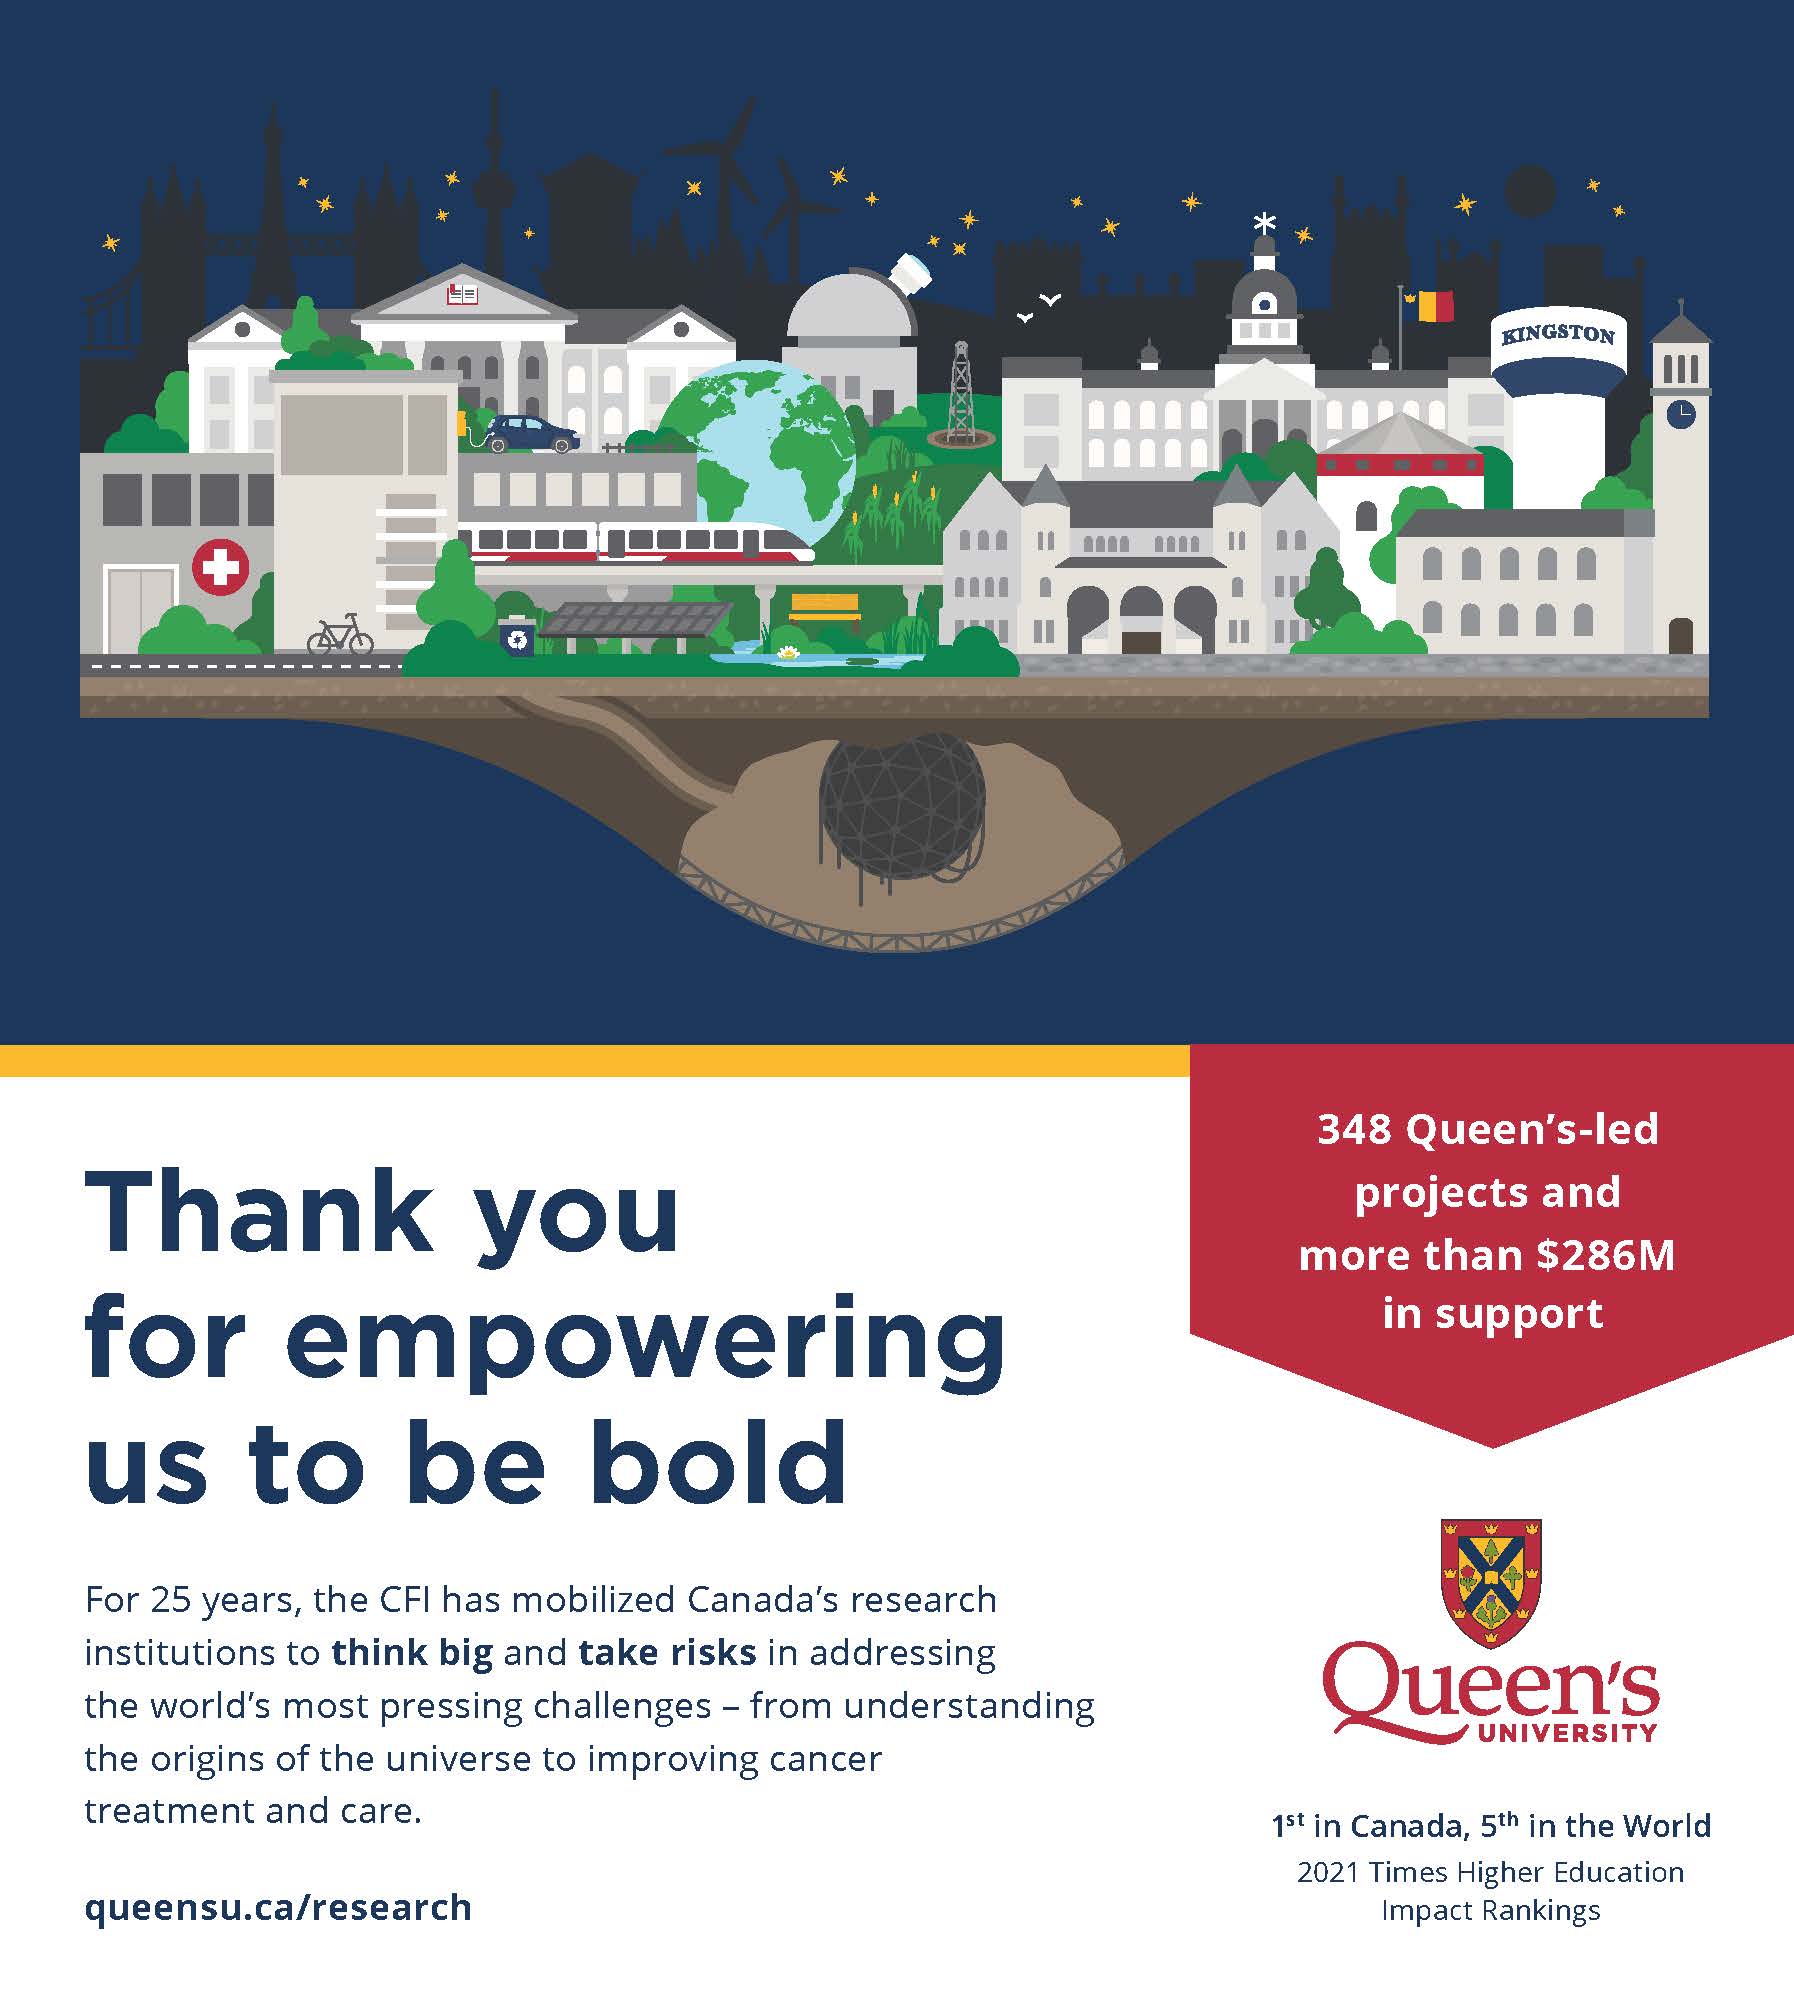 [Thank you for empowering us to be bold. For 25 years, the CFI has mobilized Canada's research institutions to think bi and take risks in addressing the world's most pressing challenges - from understanding the origins of the universe to improving cancer treatment and care. queensu.ca/research 